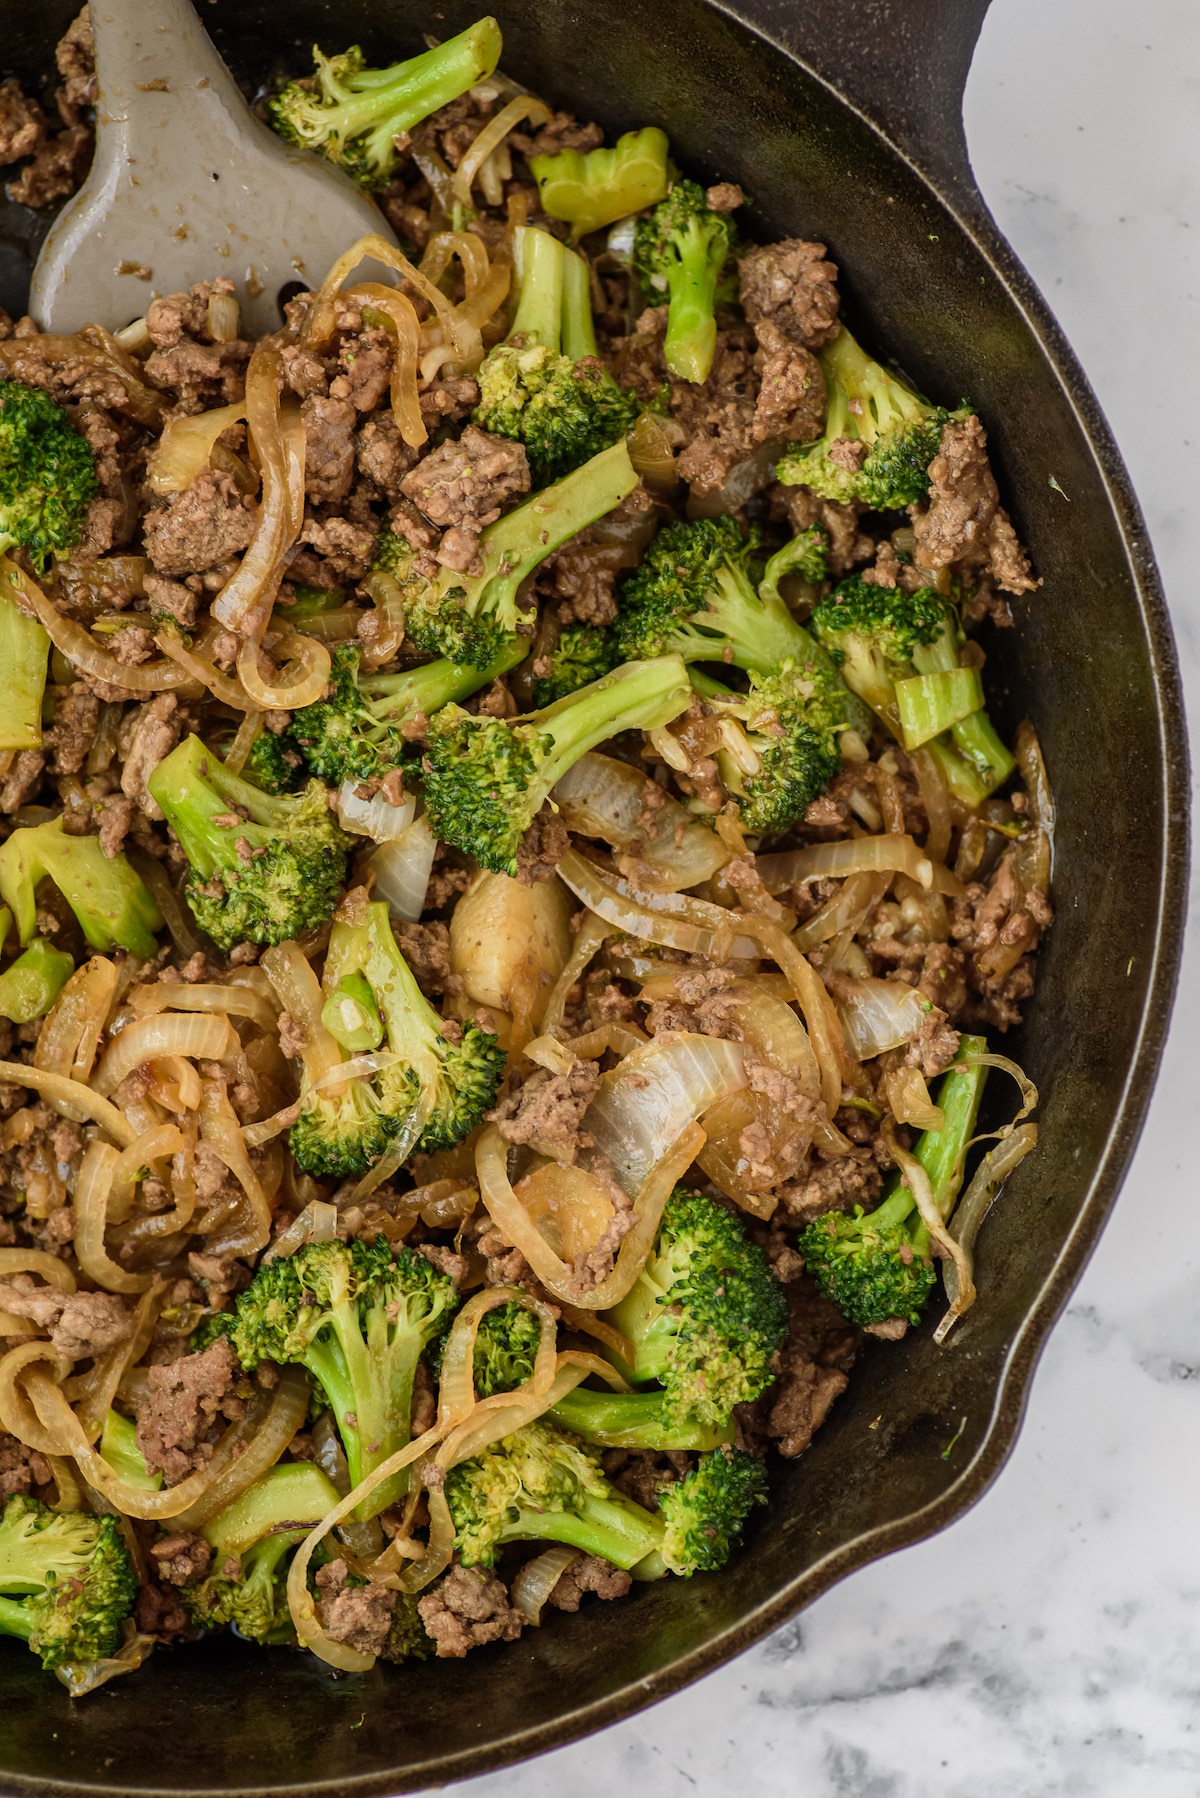 beef, broccoli and other things mixed together in a black pan